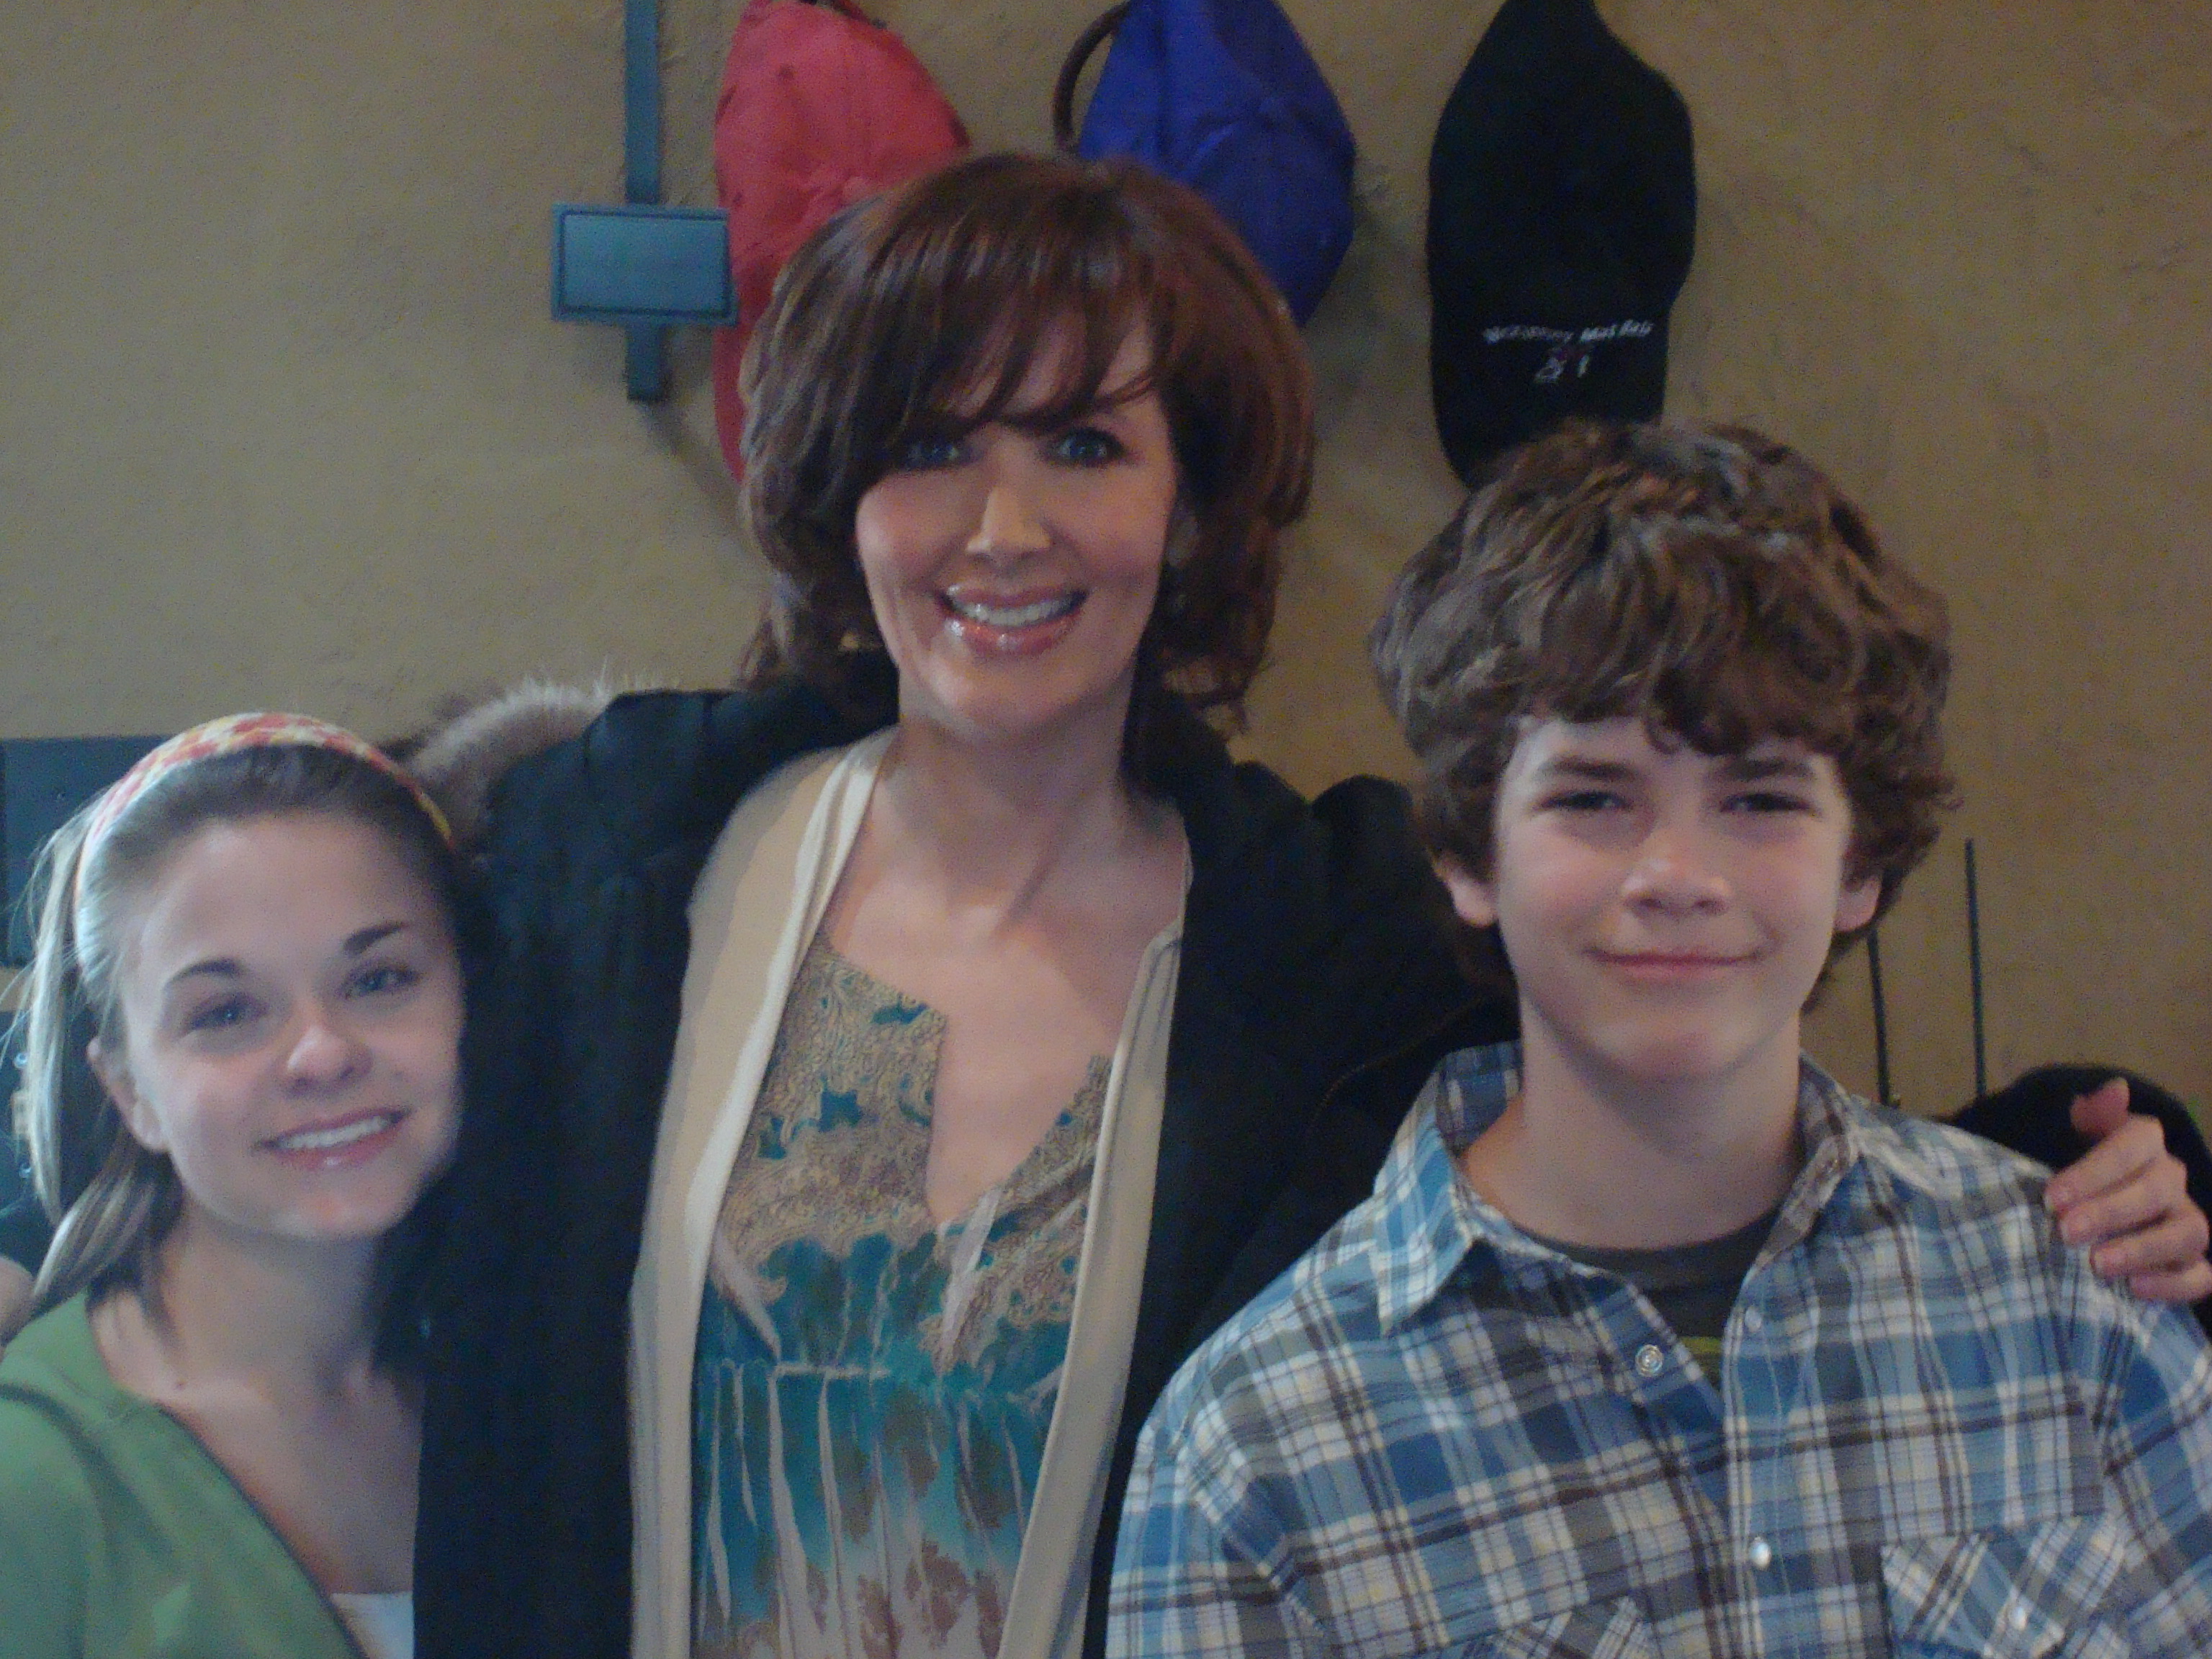 Grant with Janine Turner on set of Maggie's passage.